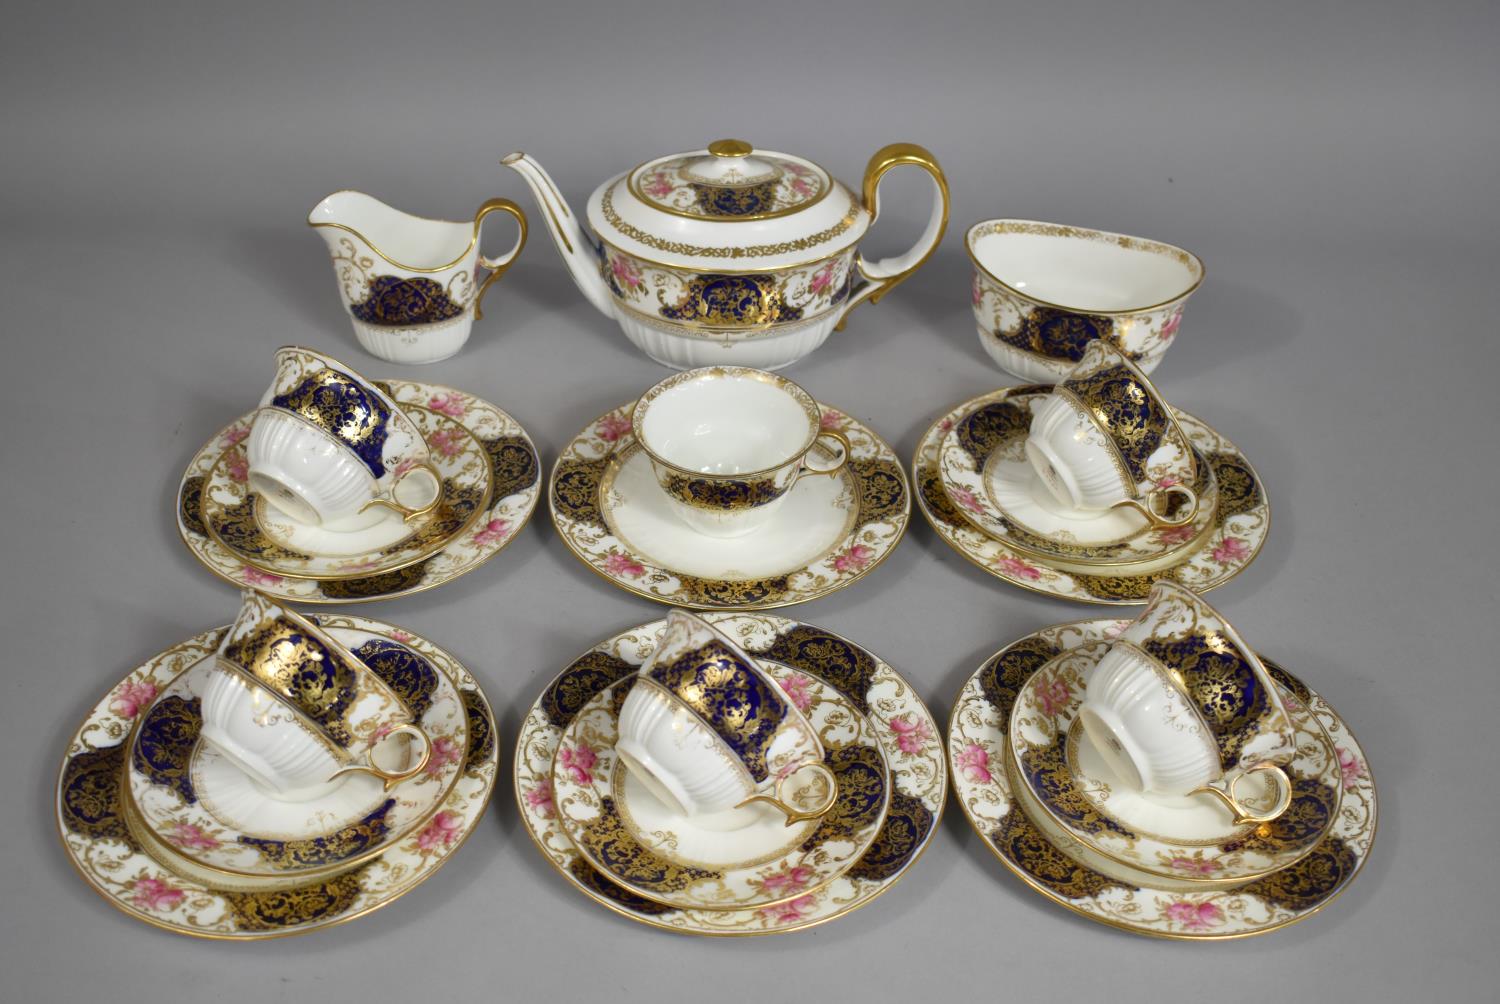 A Late 19th/Early 20th Century Wedgwood Tea Set Decorated with Floral Gilt and Cobalt Blue Inset